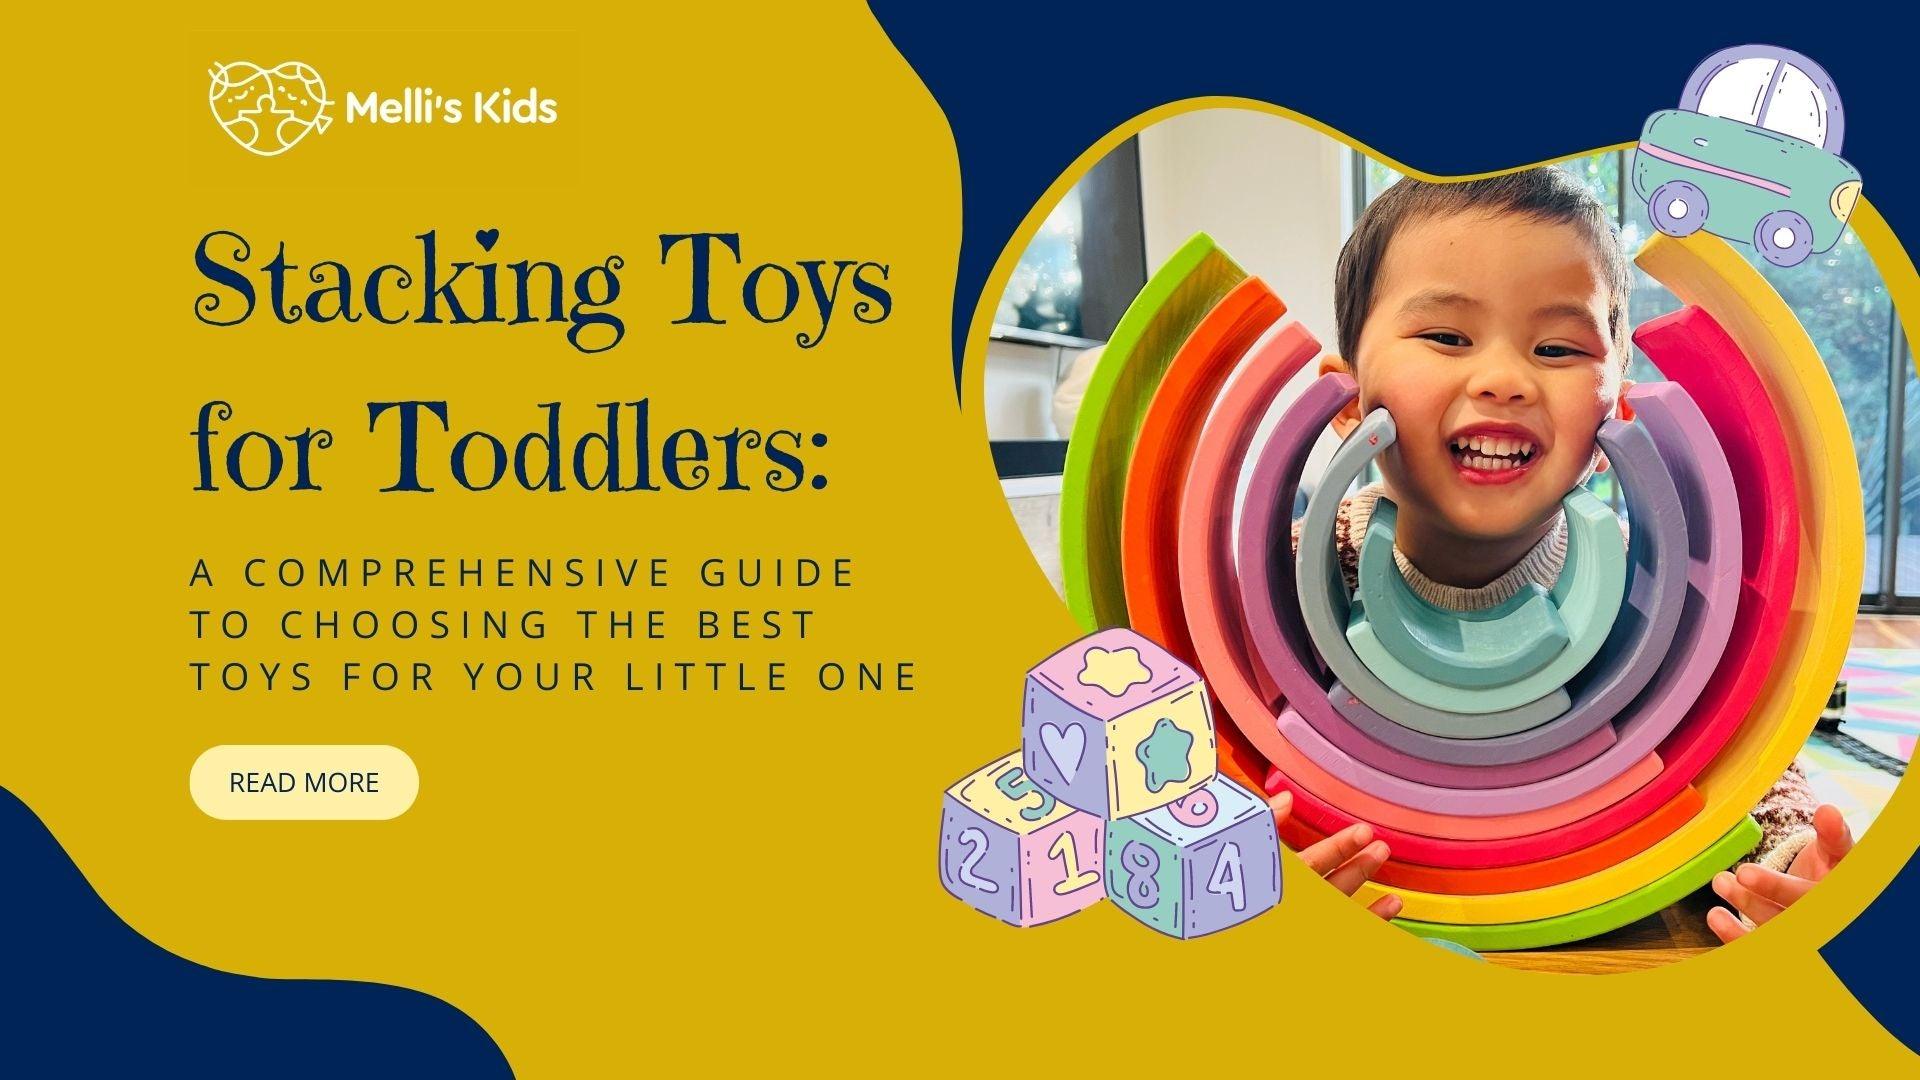 Stacking Toys for Toddlers: A Comprehensive Guide to Choosing the Best Toys for Your Little One - Melli's Kids